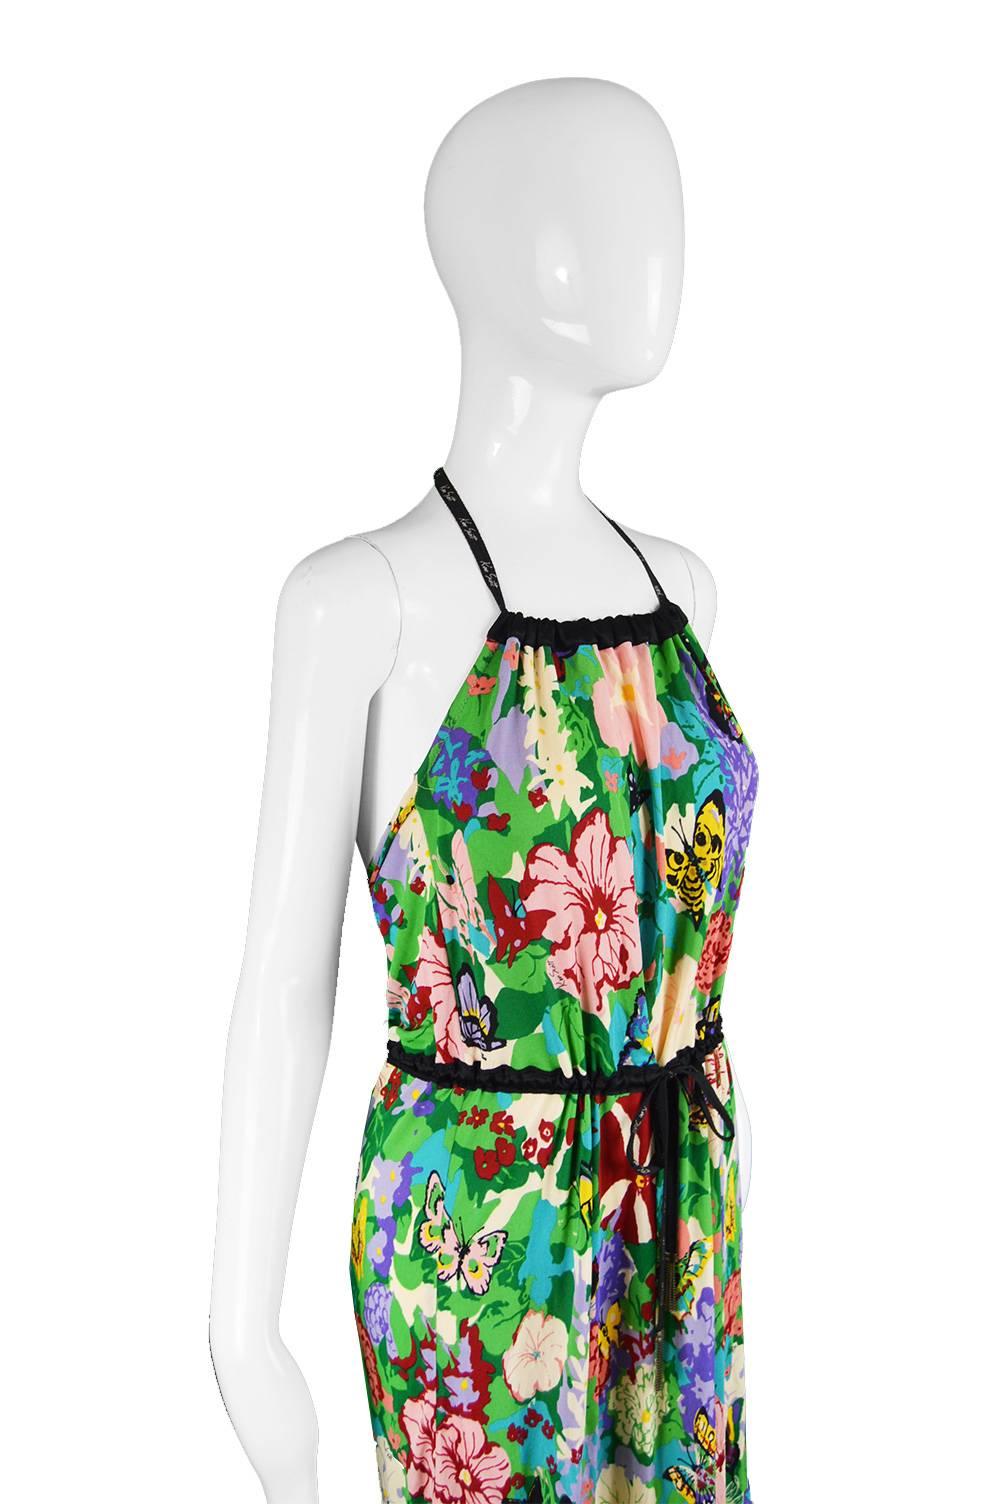 Ken Scott Brightly Printed Tropical Backless Halterneck Jersey Dress

Size: Marked 42 which is roughly a women's UK 14/ US 10 but could also fit smaller due to drawstring waist and tied bust.  
Bust - Up to 38” / 96cm
Waist - Up to 38” / 96cm
Hips -